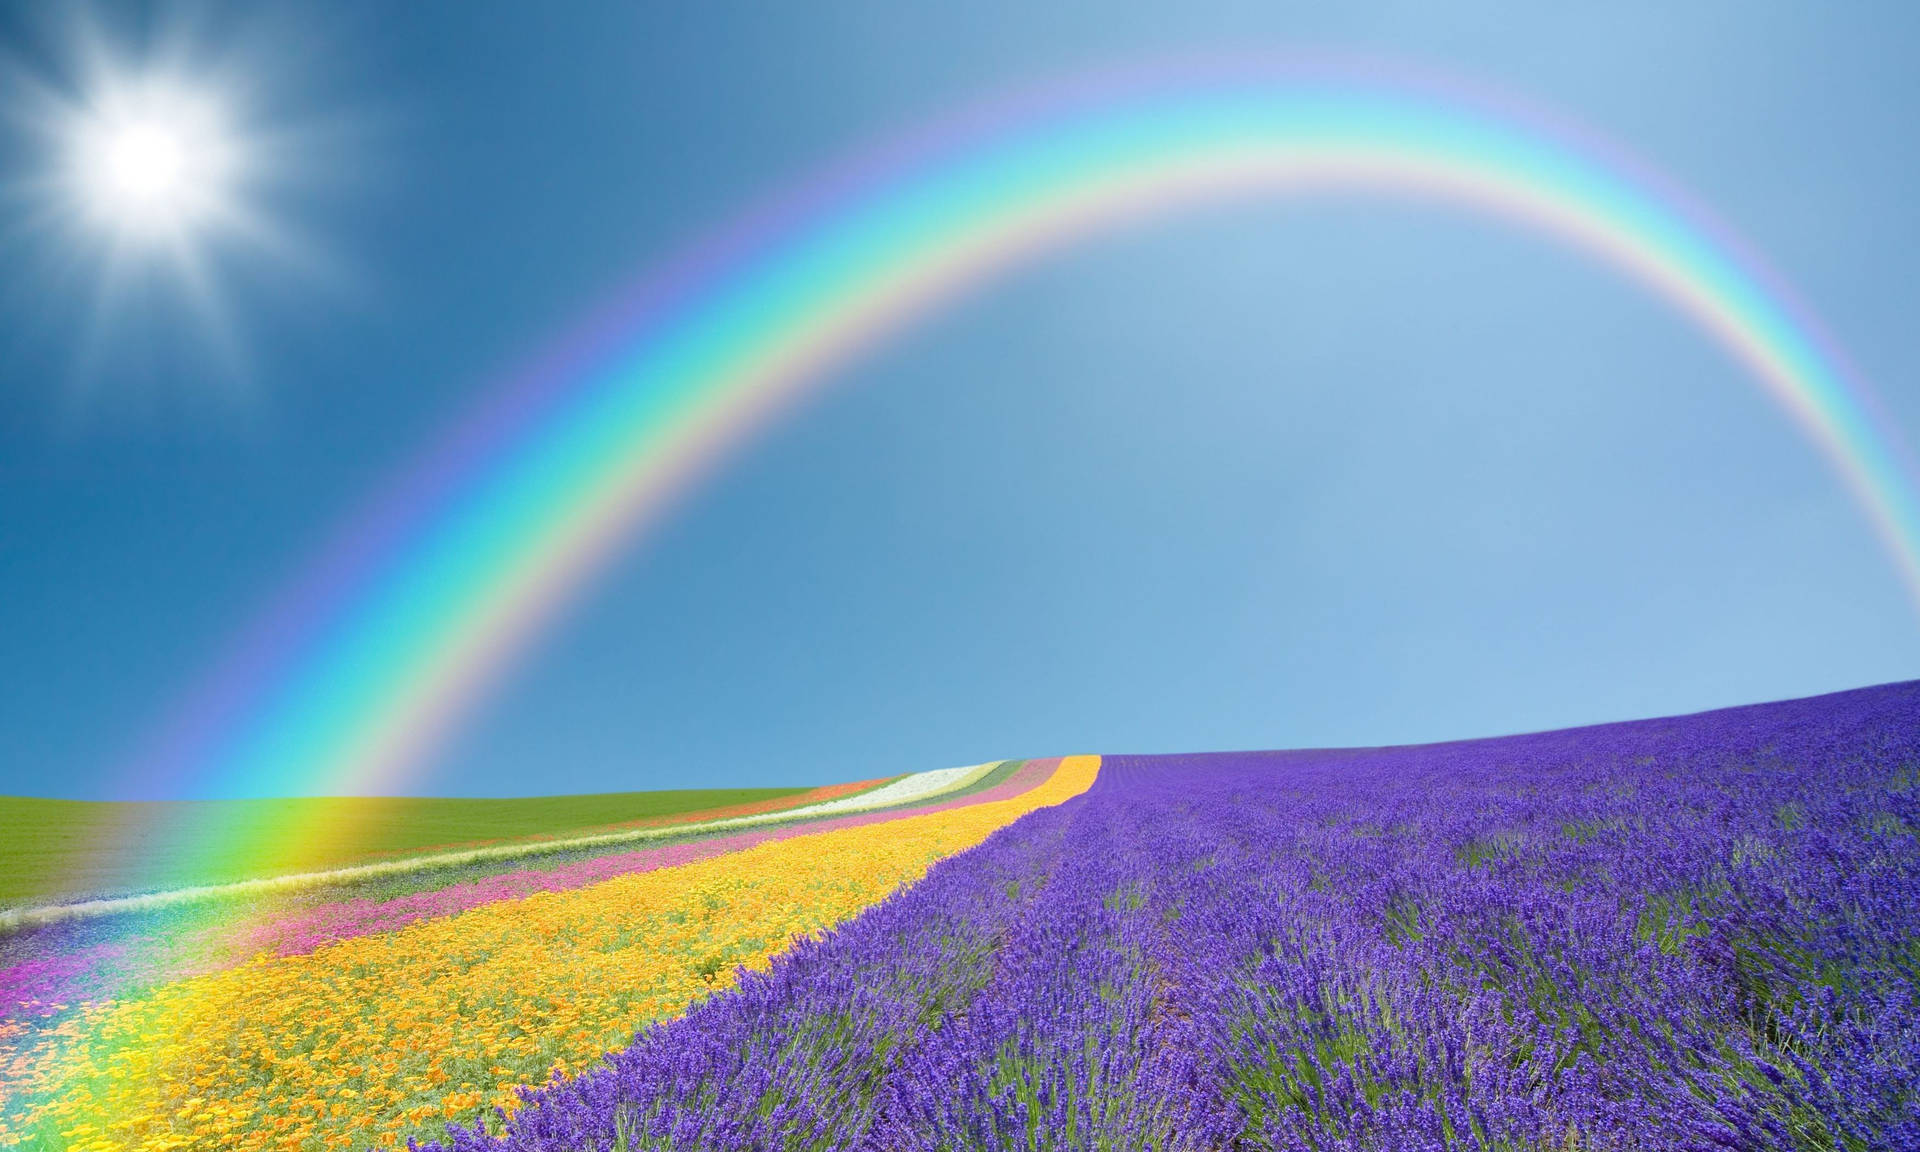 A peaceful view of a colourful rainbow in the sky Wallpaper